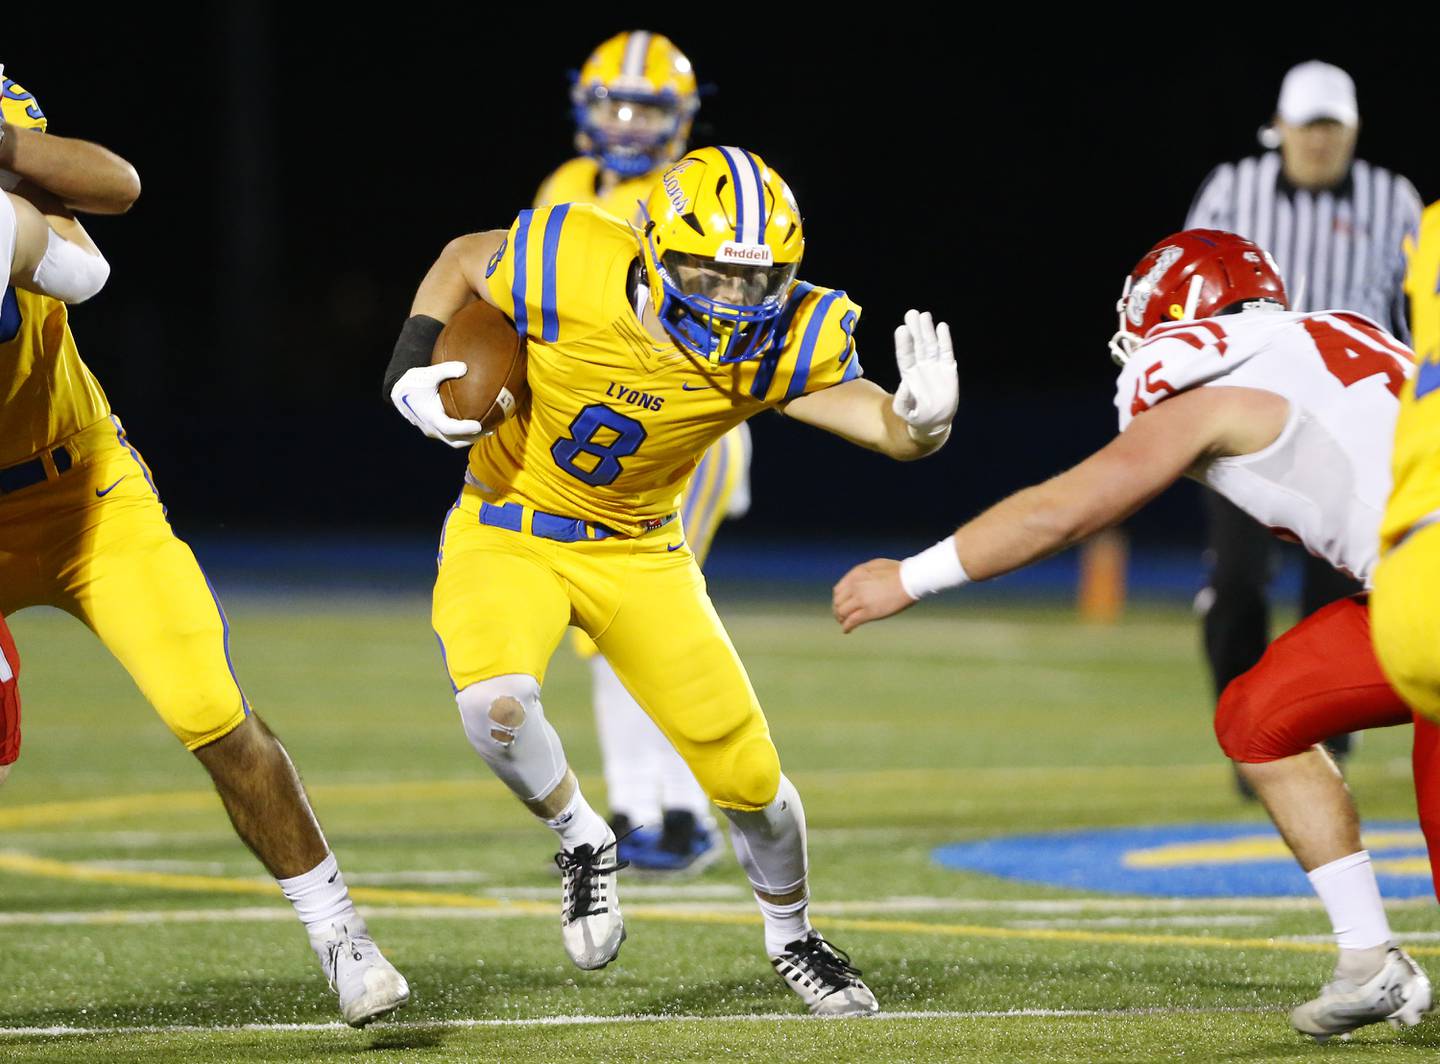 Lyons' Danny Pasko (8) runs the ball against Naperville Central during a first round Class 8A varsity football playoff game between Lyons Township and Naperville Central on Friday, Oct. 28, 2022 in Western Springs, IL.